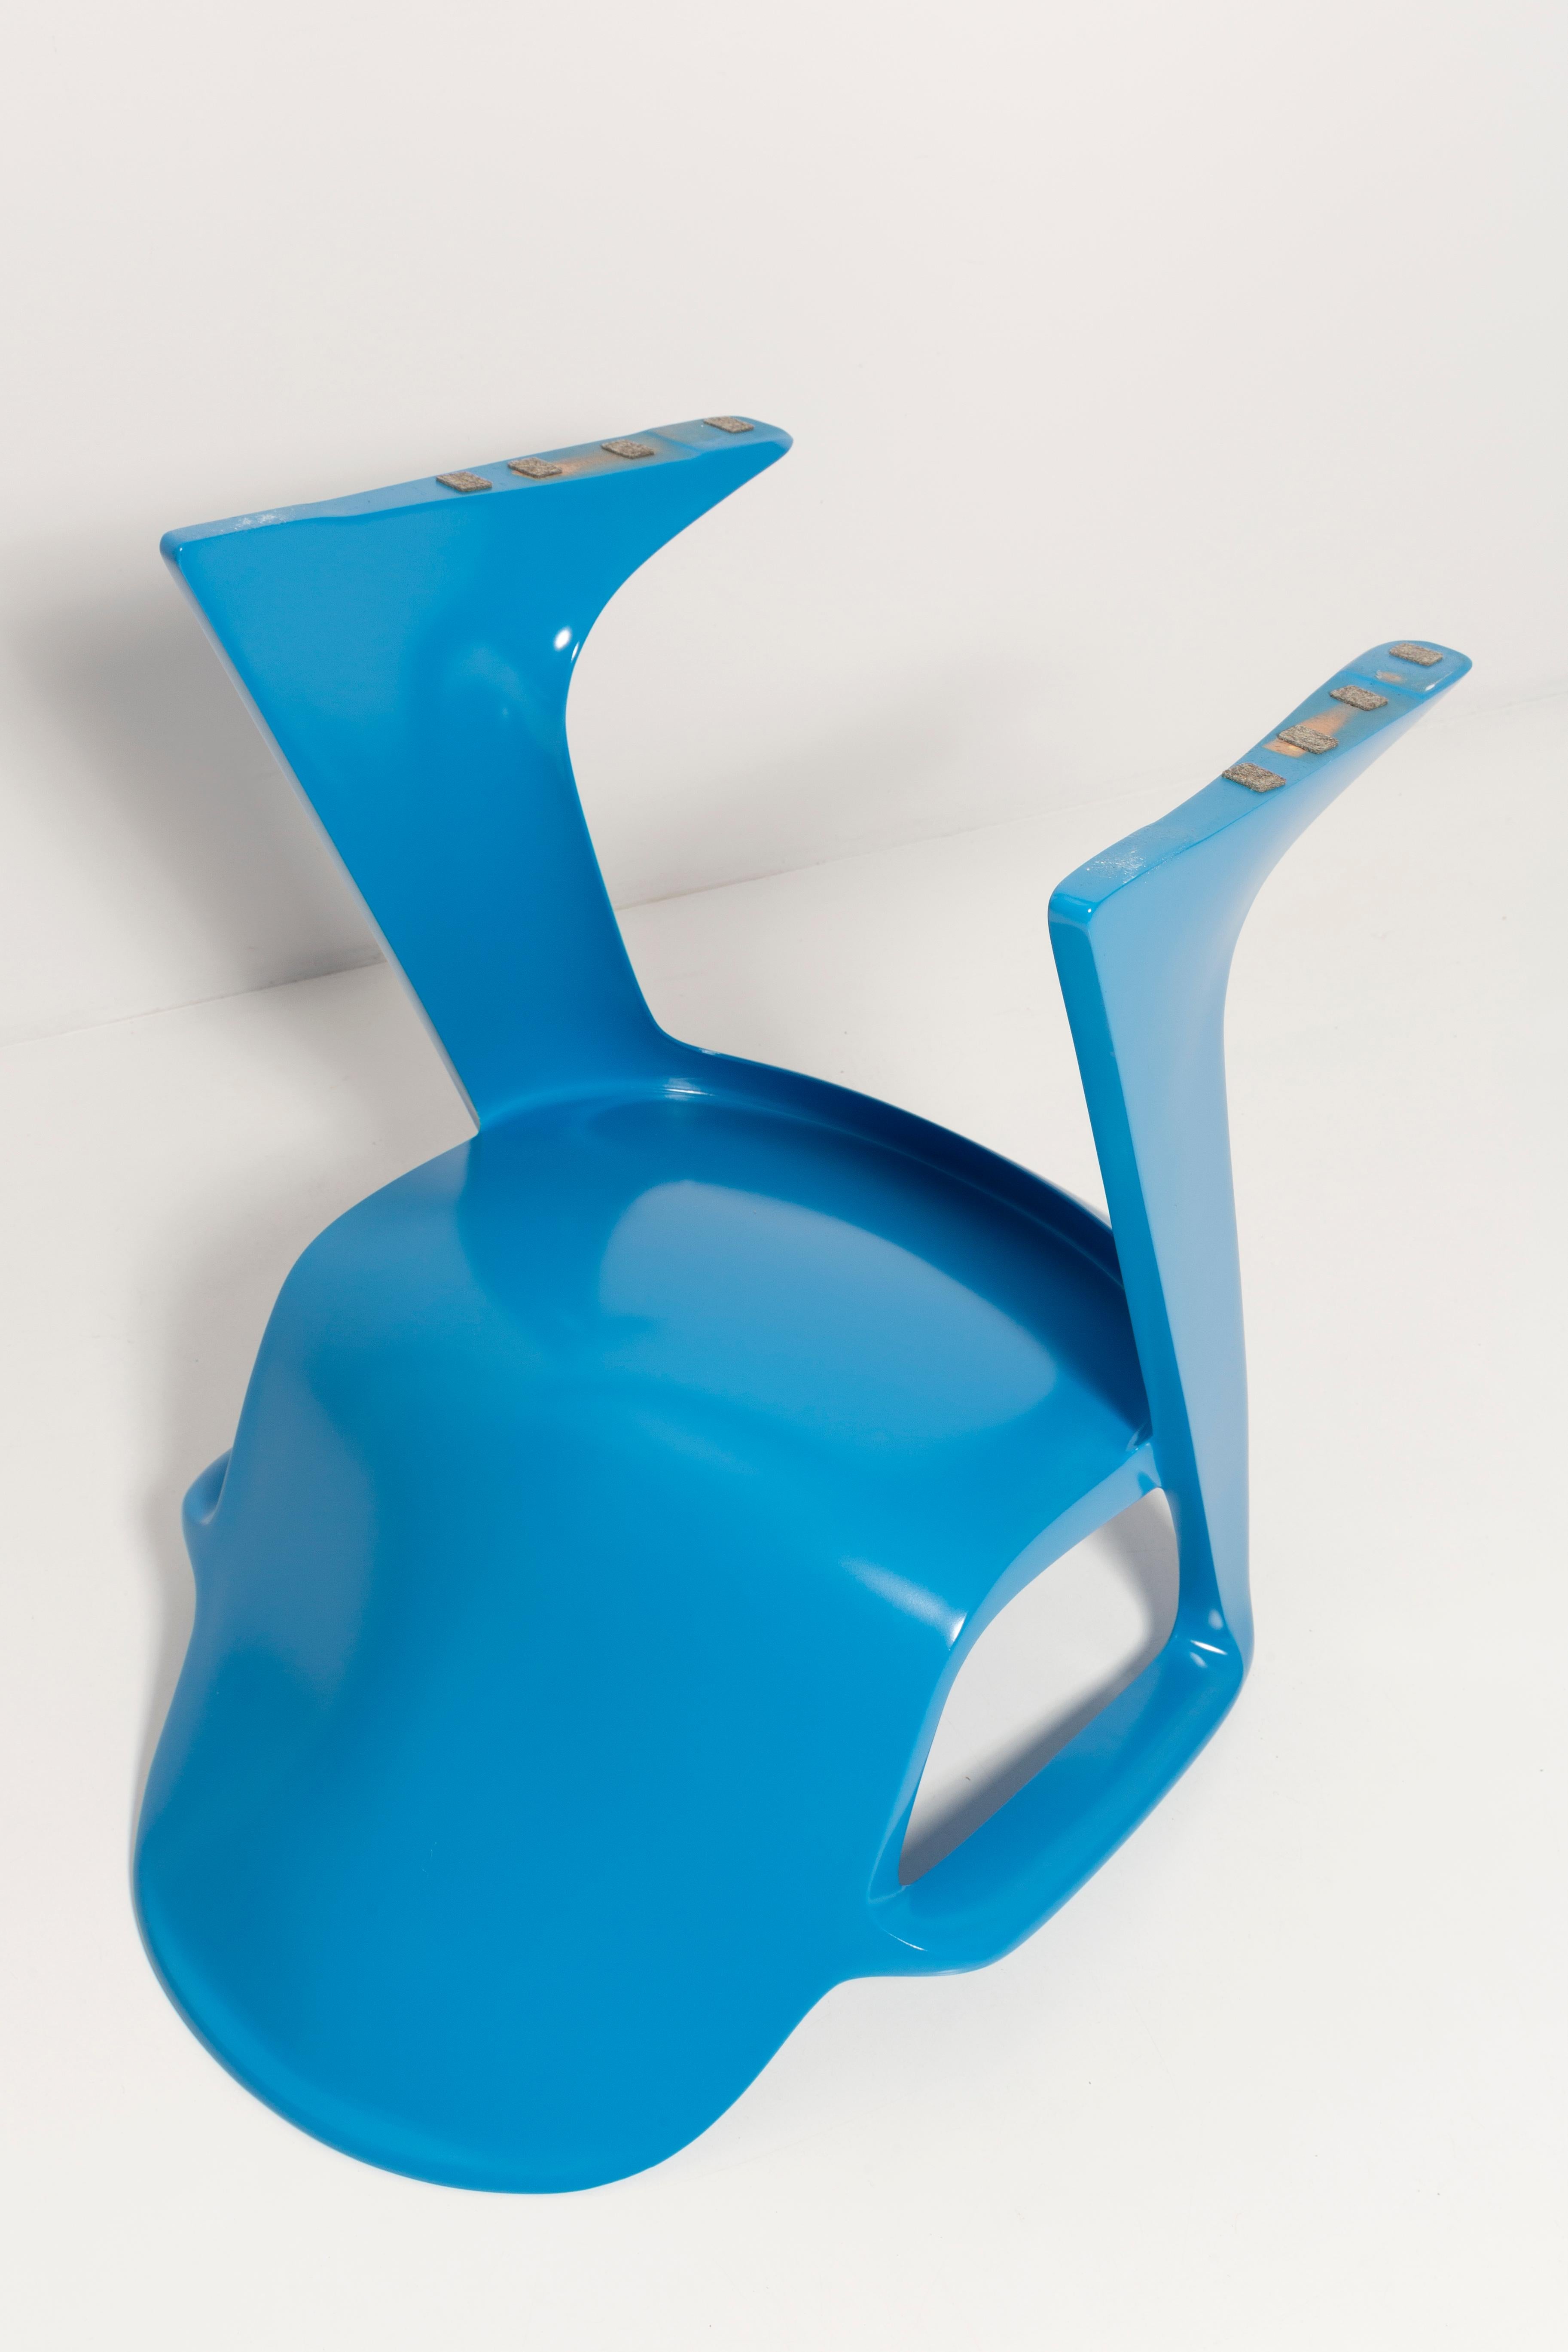 Set of Four Blue Kangaroo Chairs Designed by Ernst Moeckl, Germany, 1960s For Sale 4